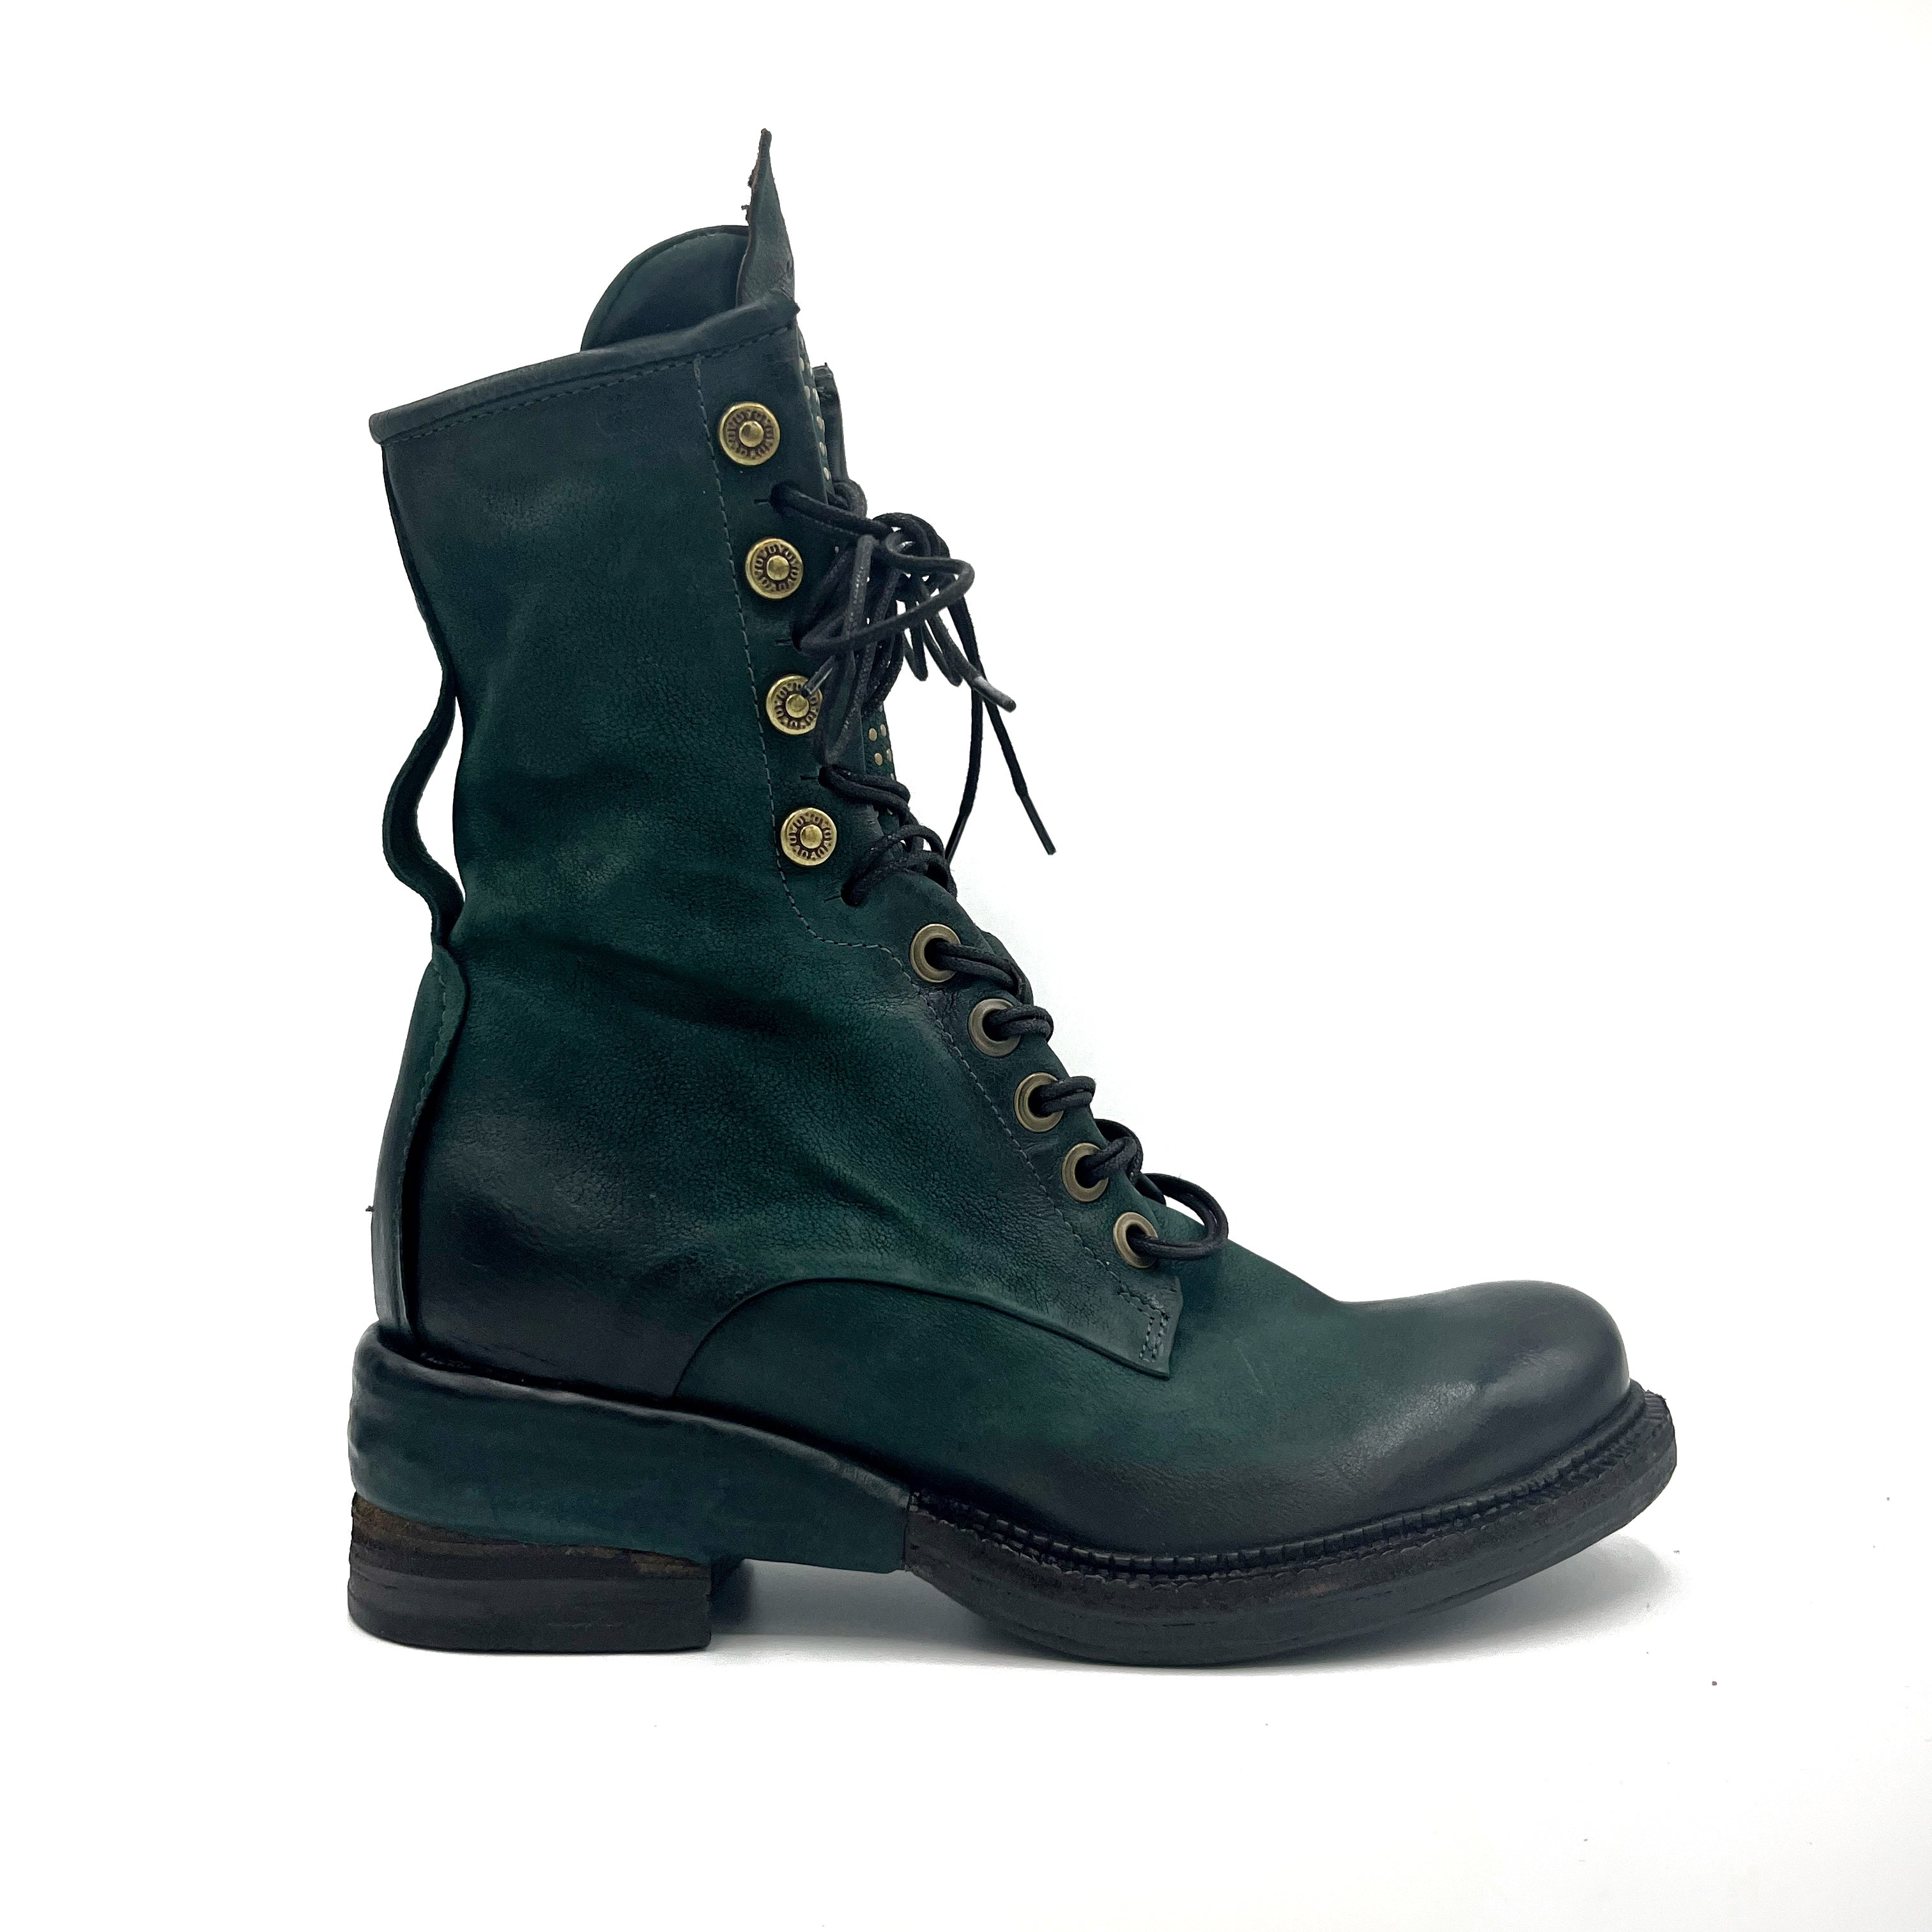 Outer side view of the A.S.98 Saunder boot in balsamic.